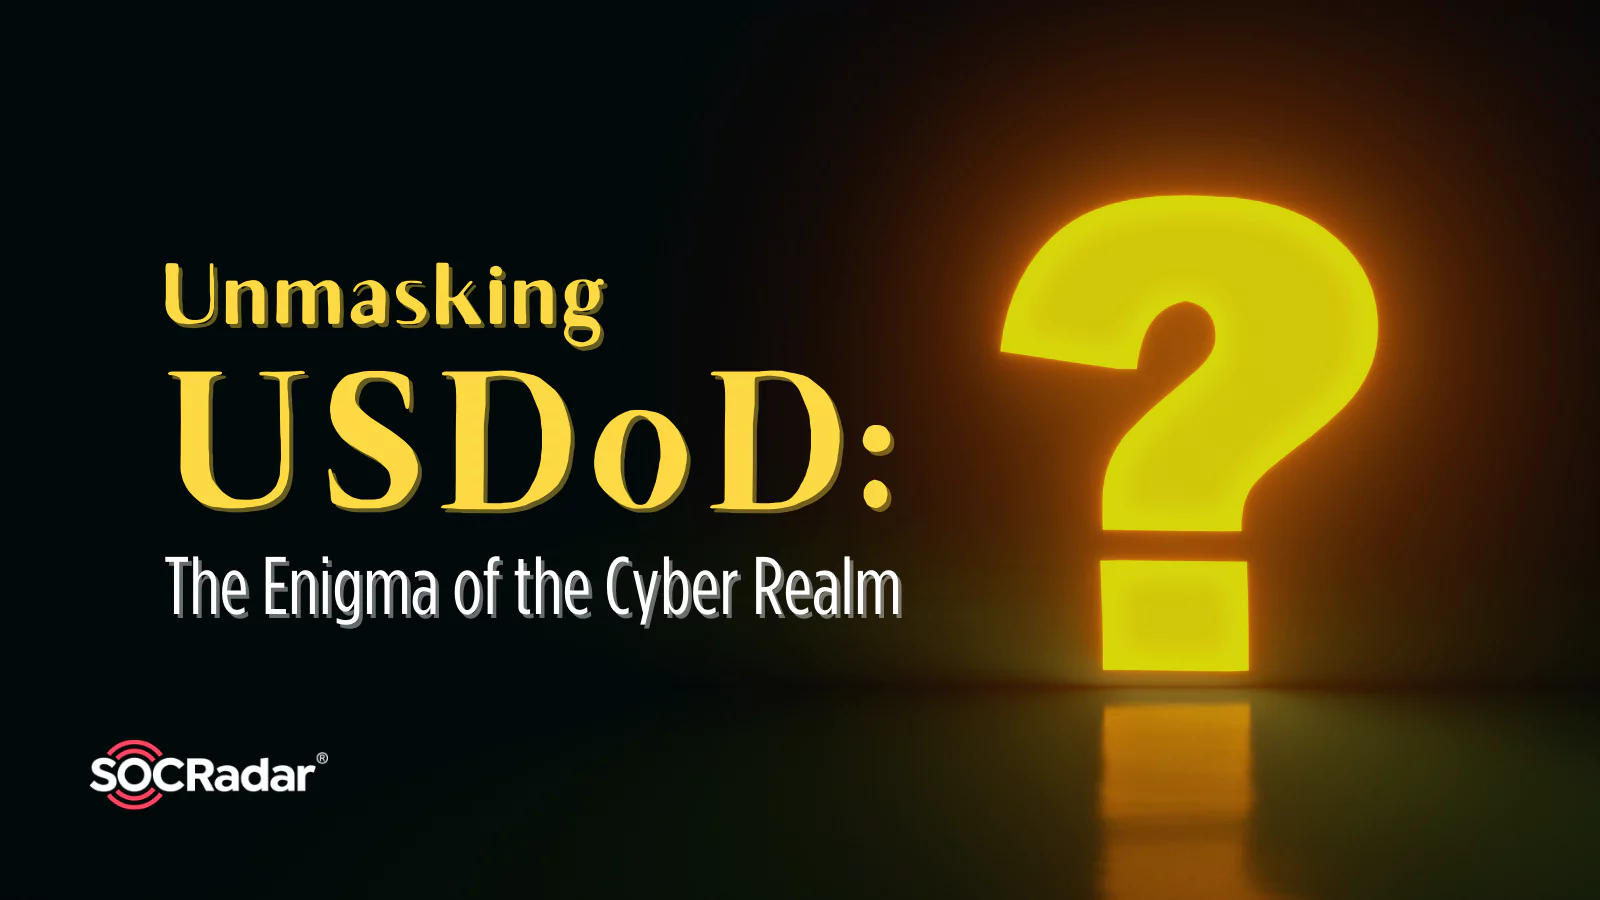 SOCRadar® Cyber Intelligence Inc. | Unmasking USDoD: The Enigma of the Cyber Realm